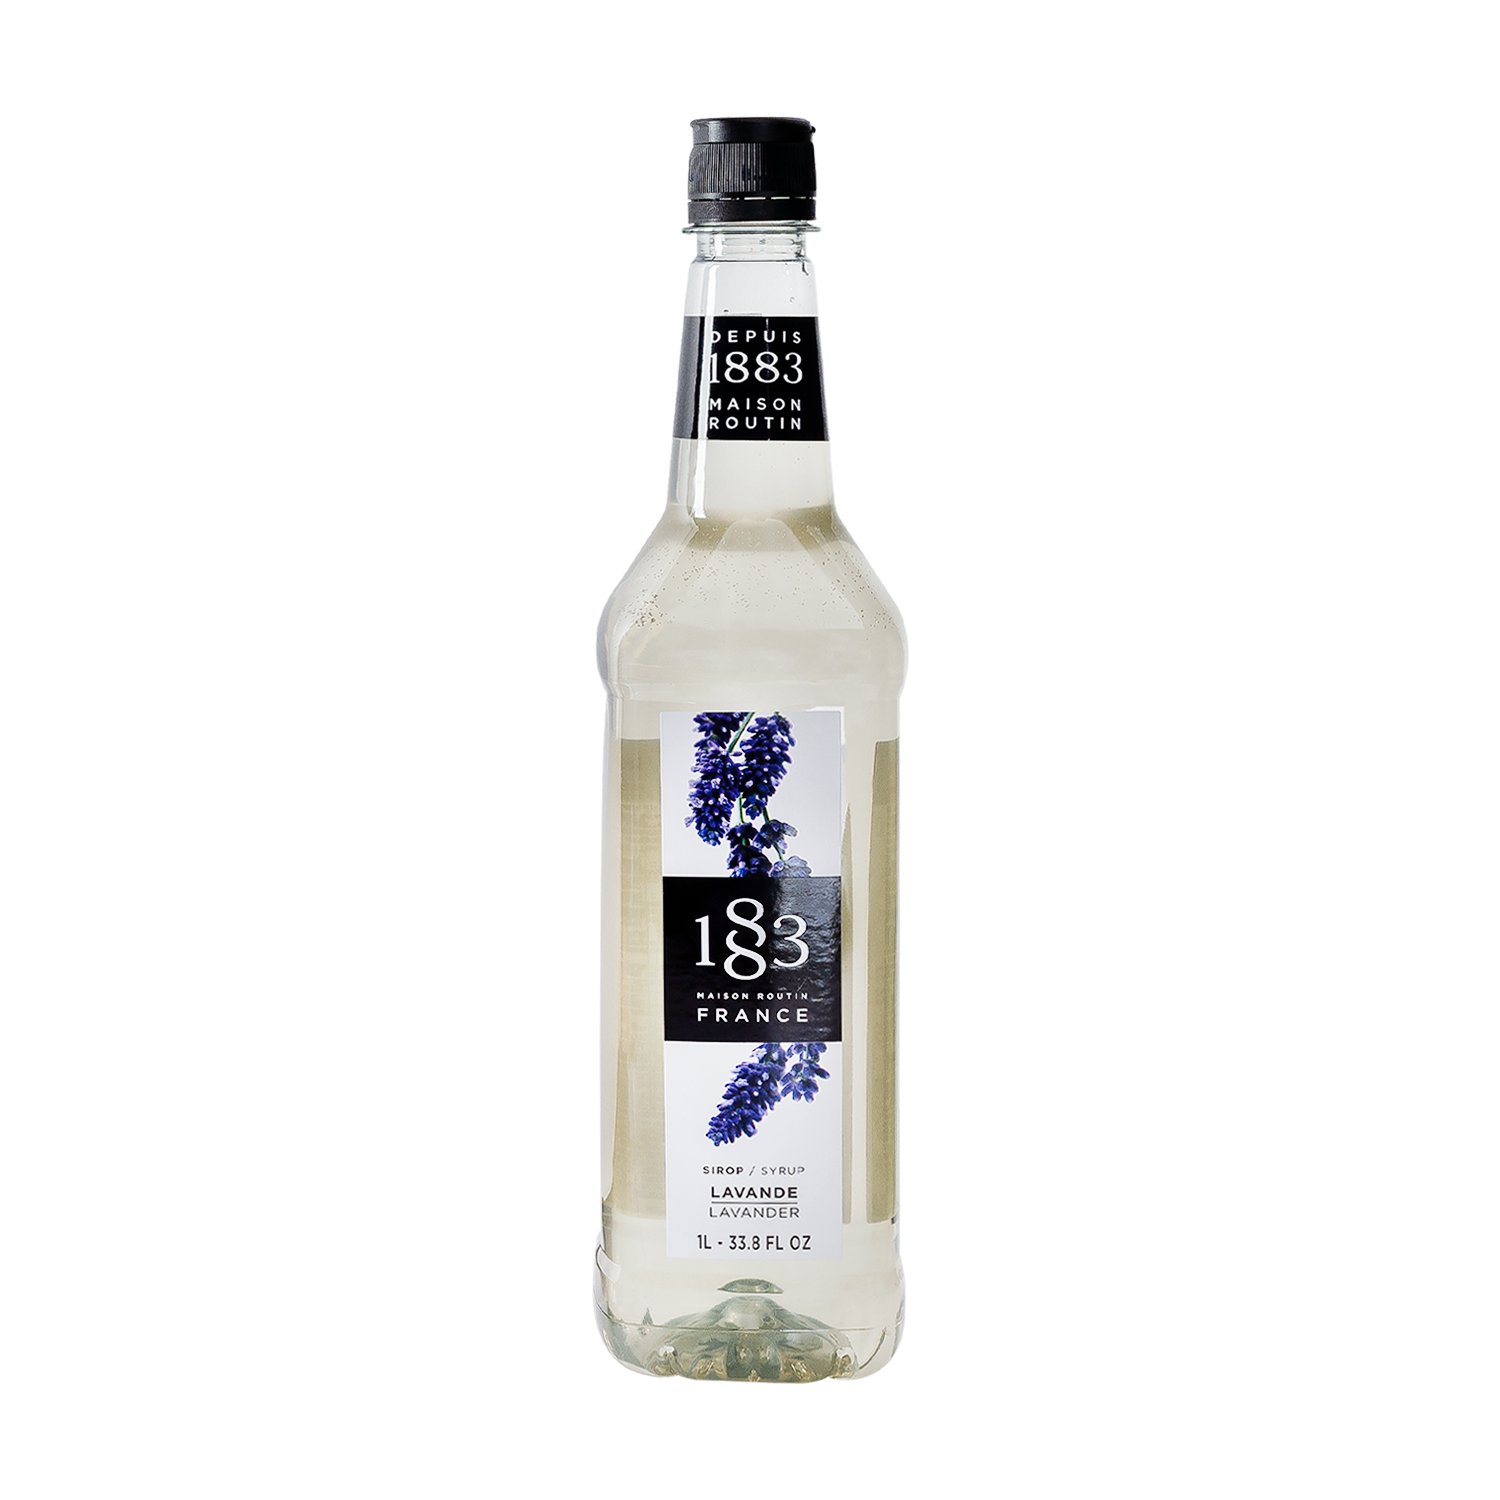 1883 Maison Routin Lavender syrup in a clear 1 Liter bottle.